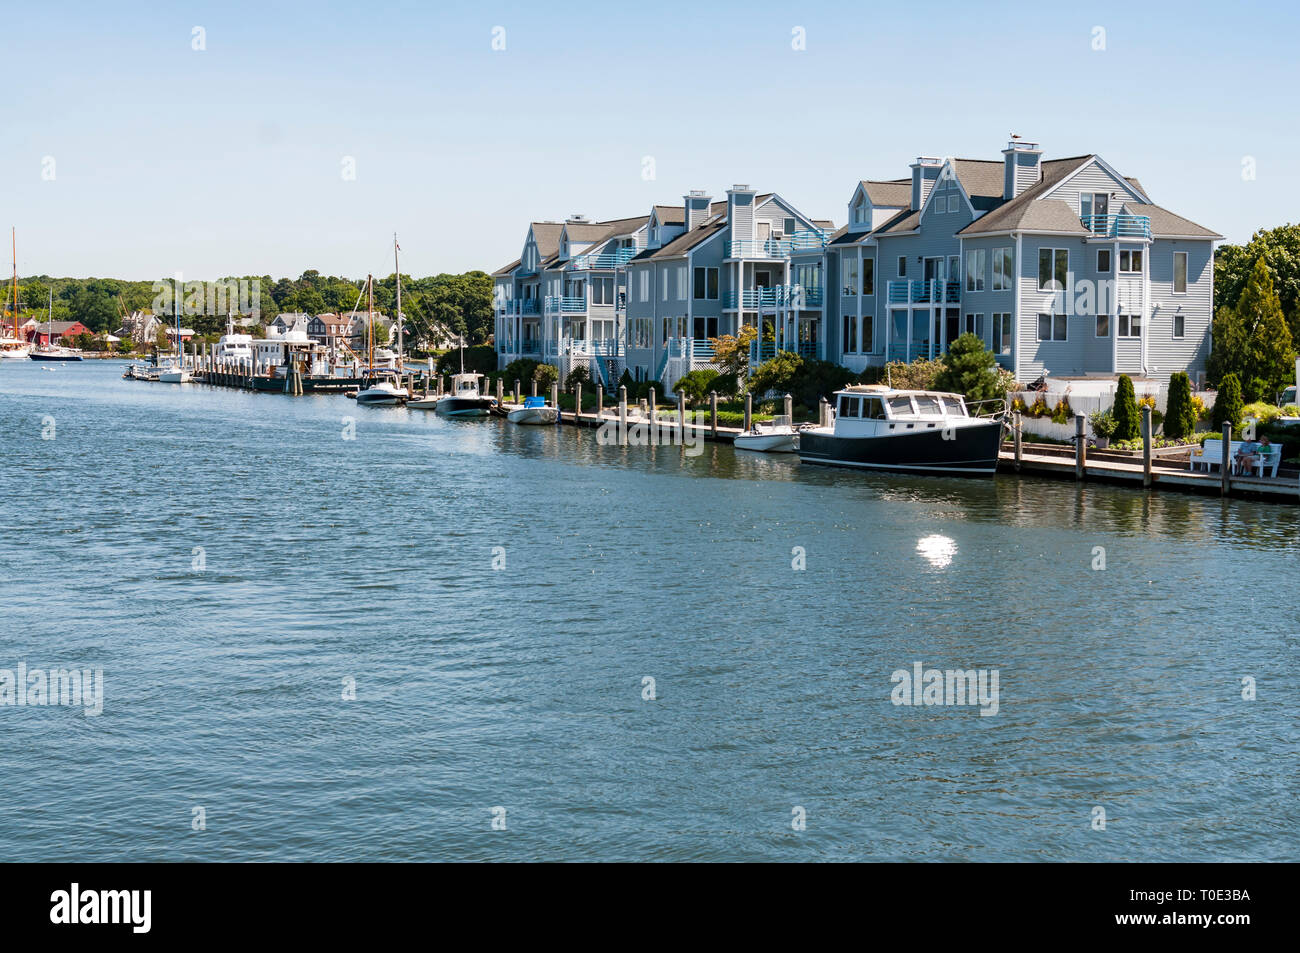 View of the Mystic Seaport with boats and houses, Connecticut Stock Photo